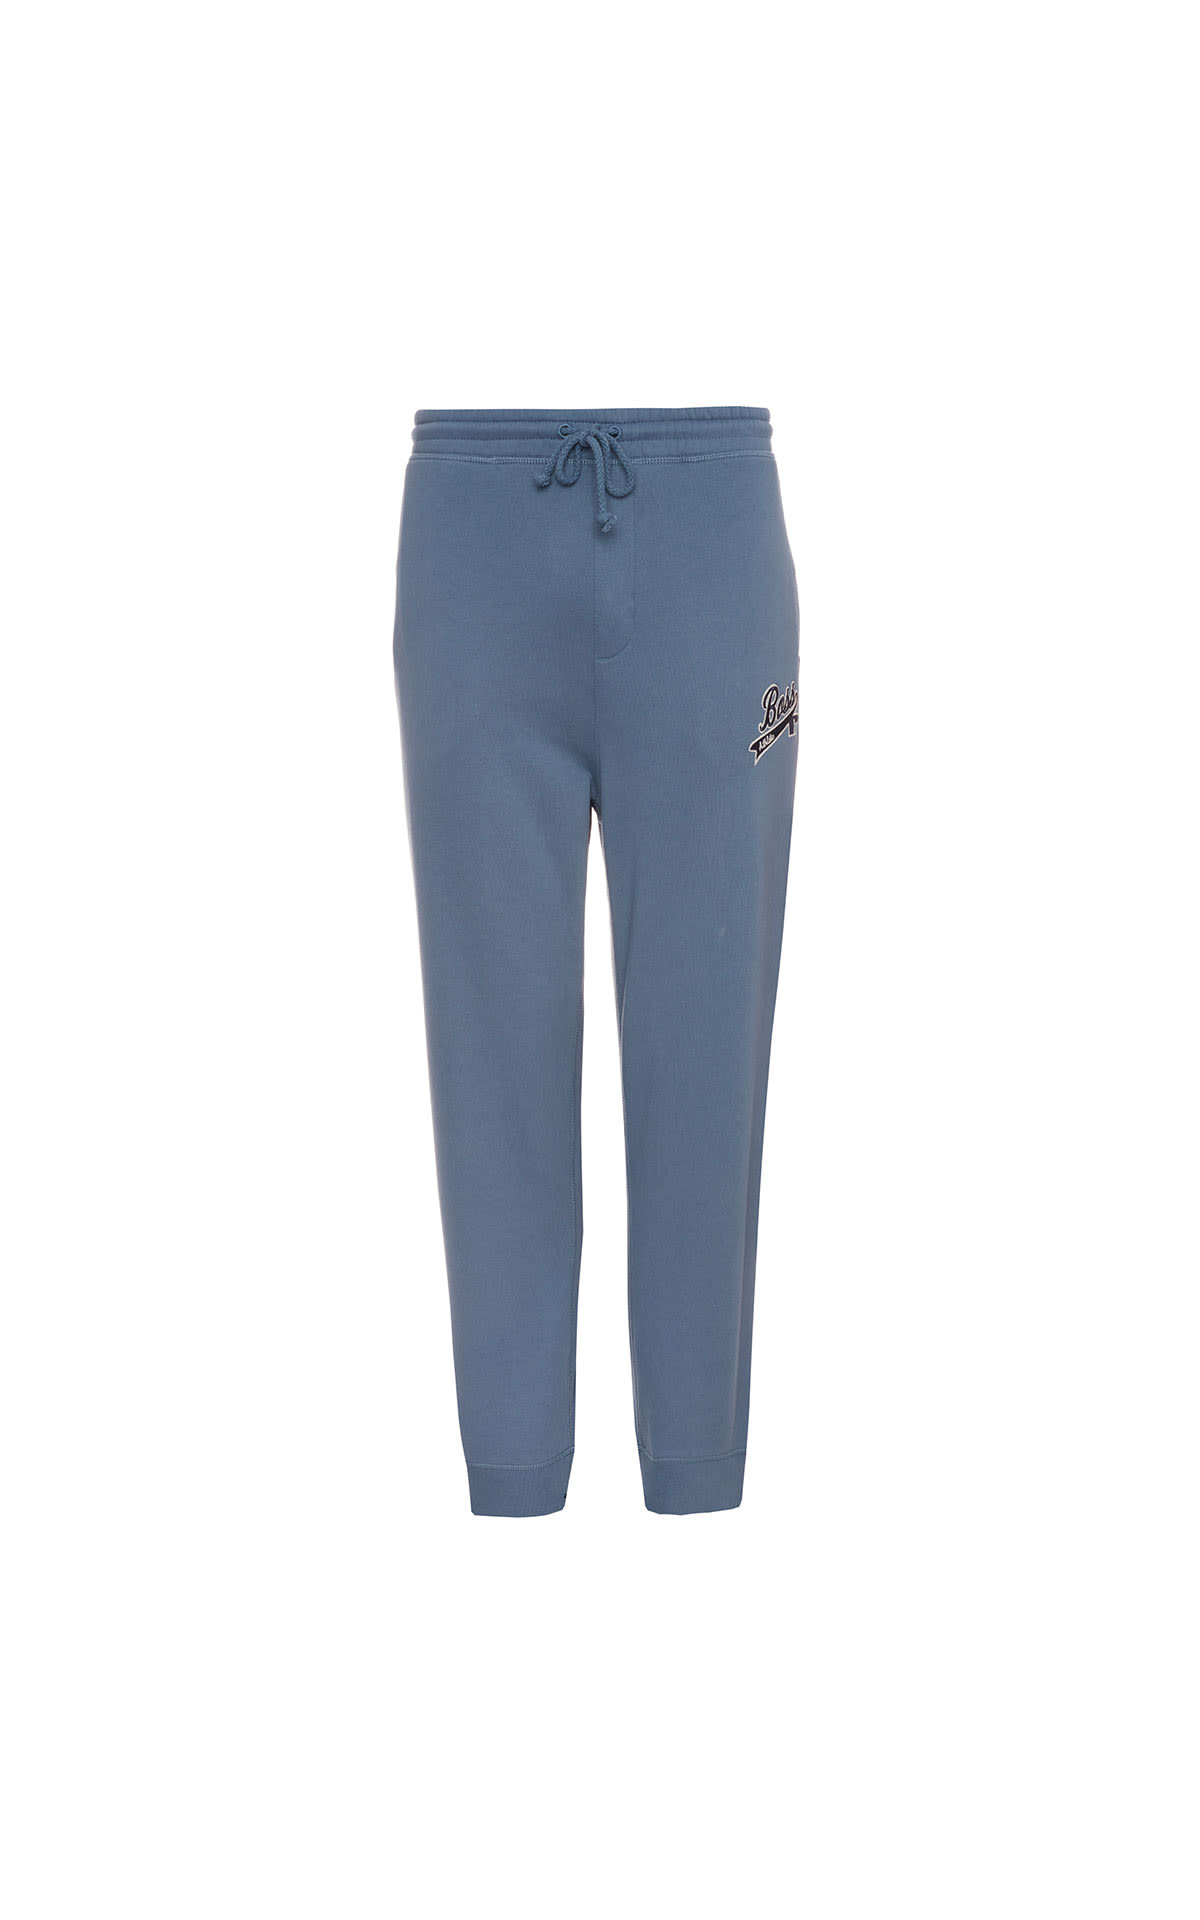 BOSS Russell Atheltic jog pants from Bicester Village